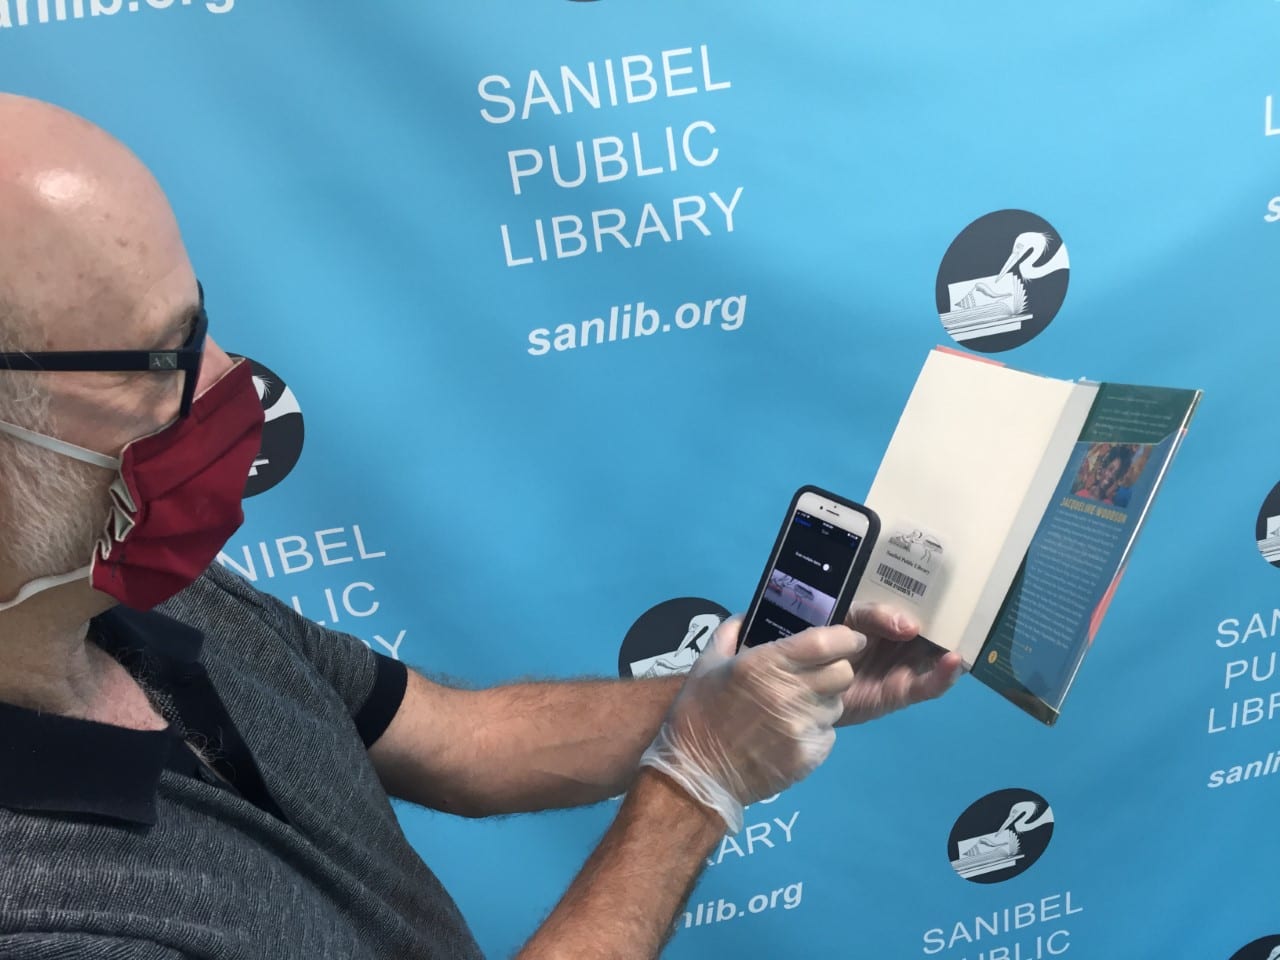 Using iPhone to scan bar code on book